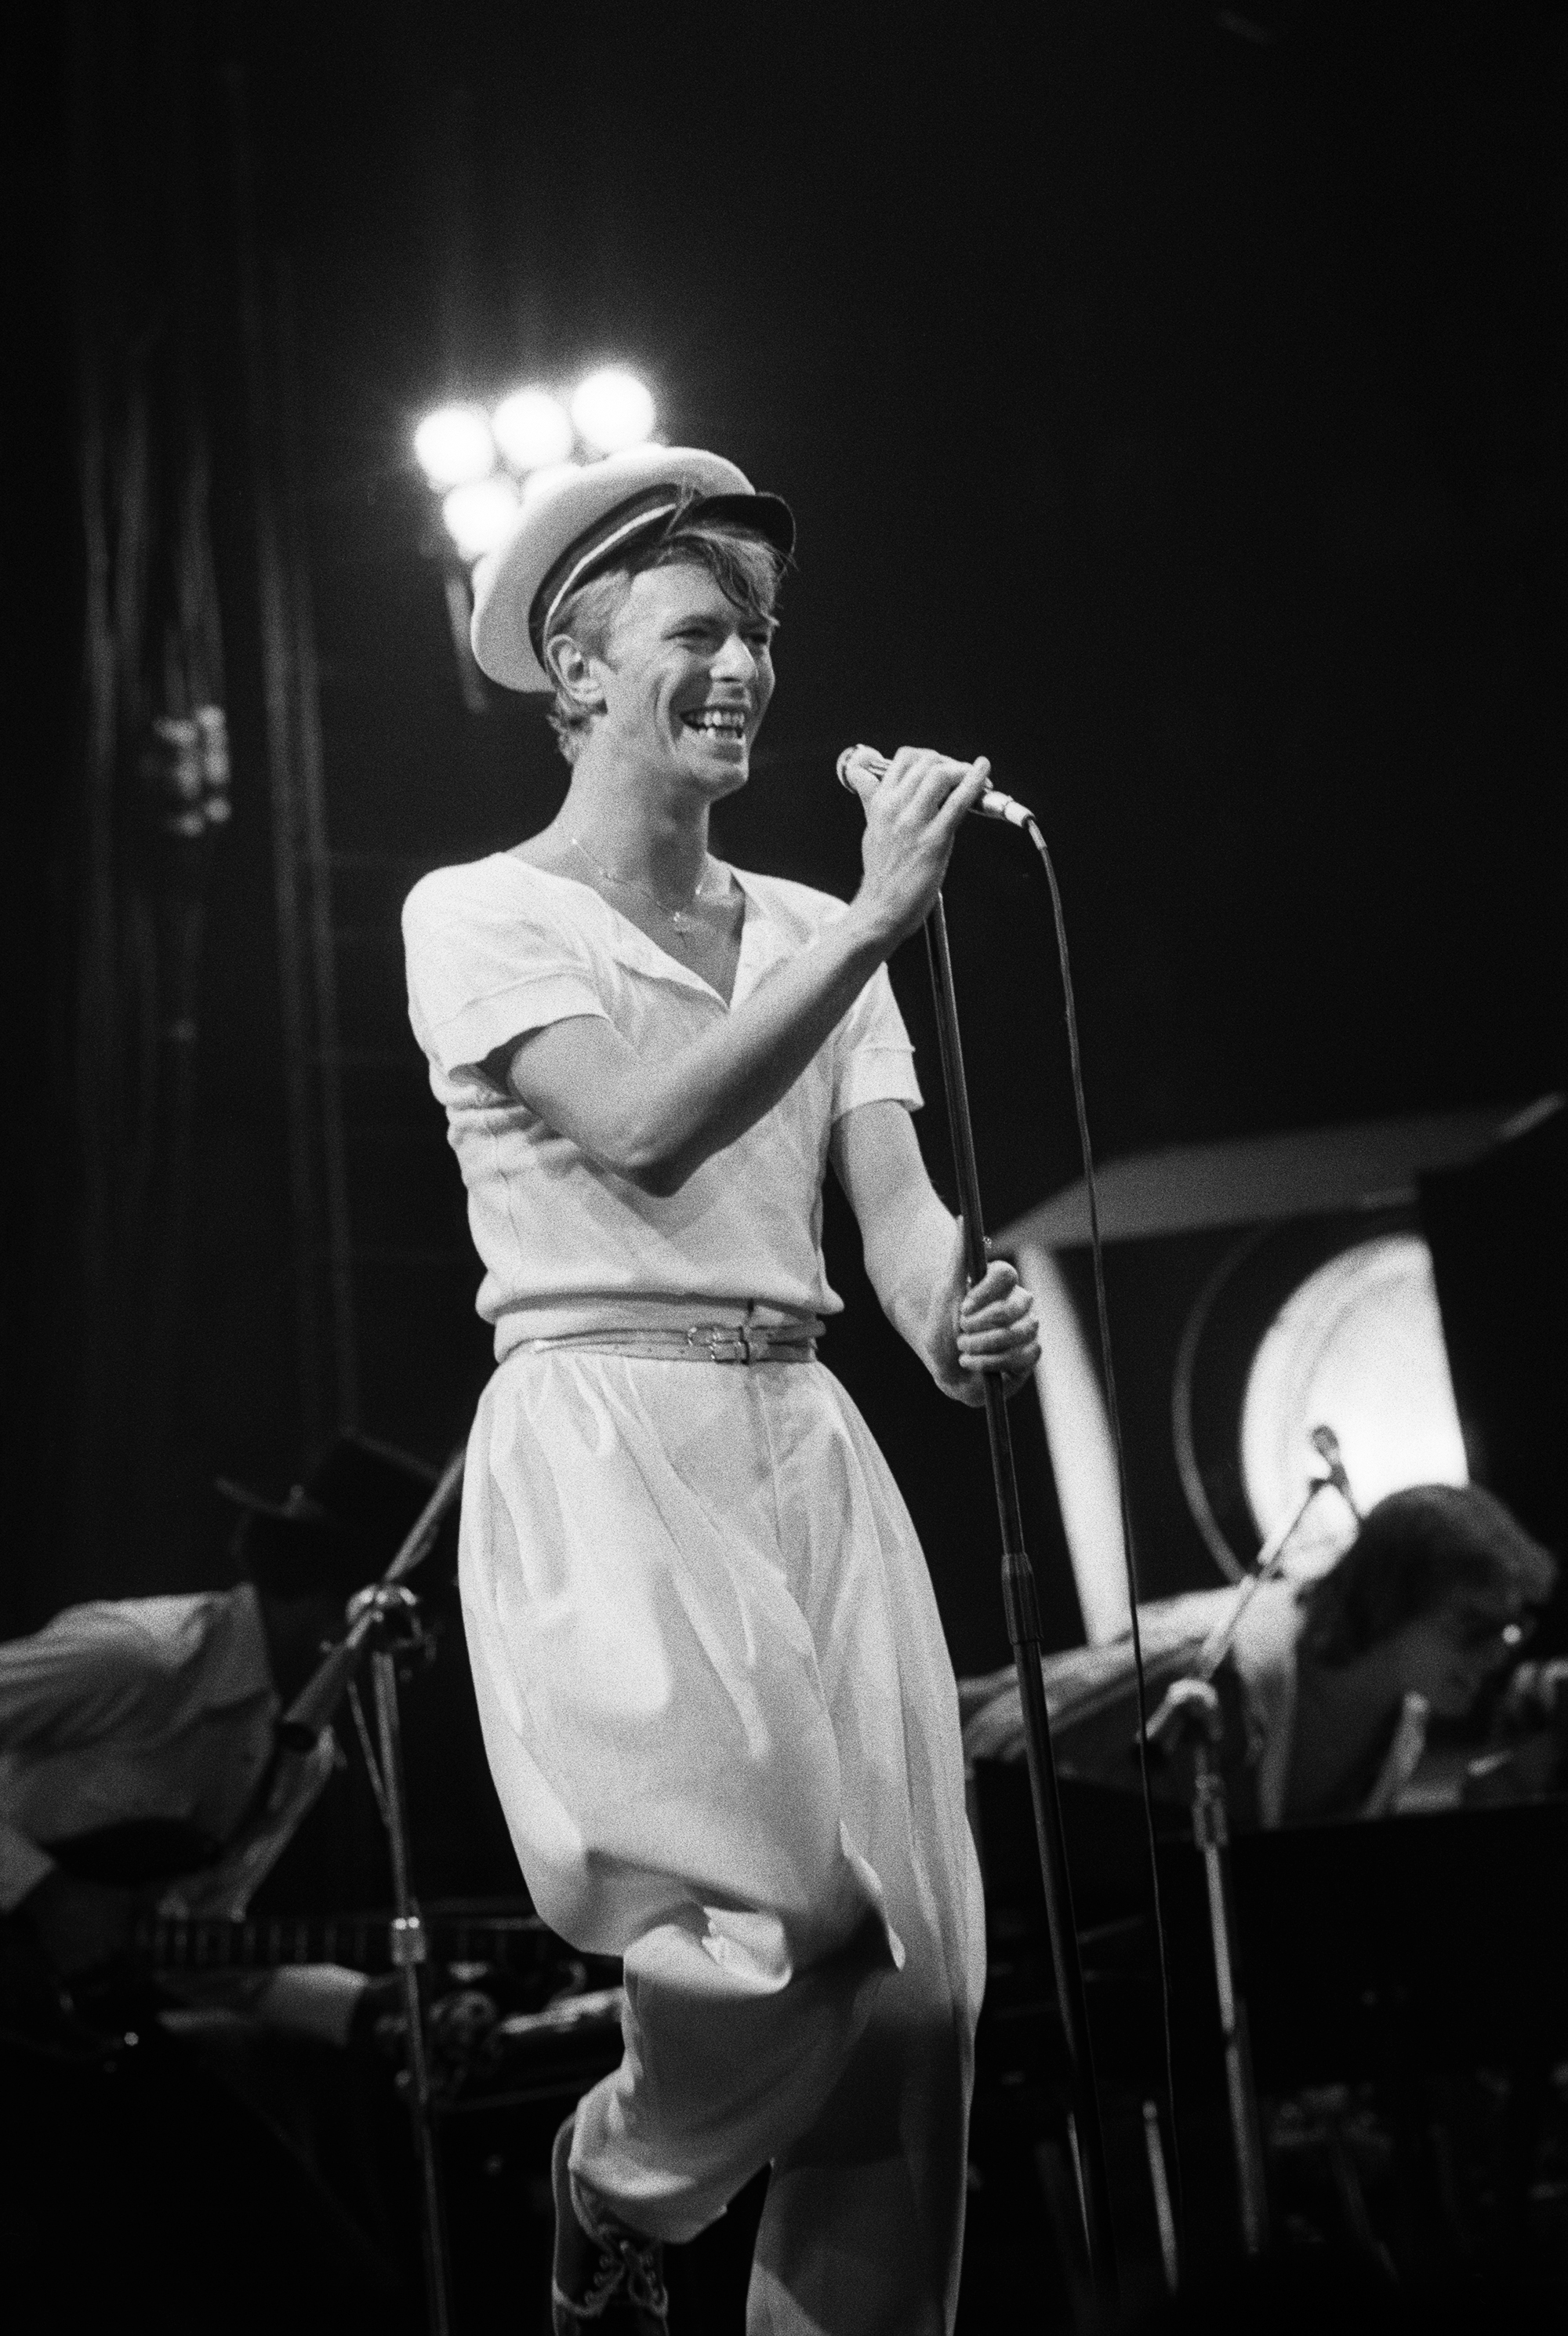 David Bowie on the Isolar II Tour at Oakland Coliseum in Oakland, Calif., 1978.